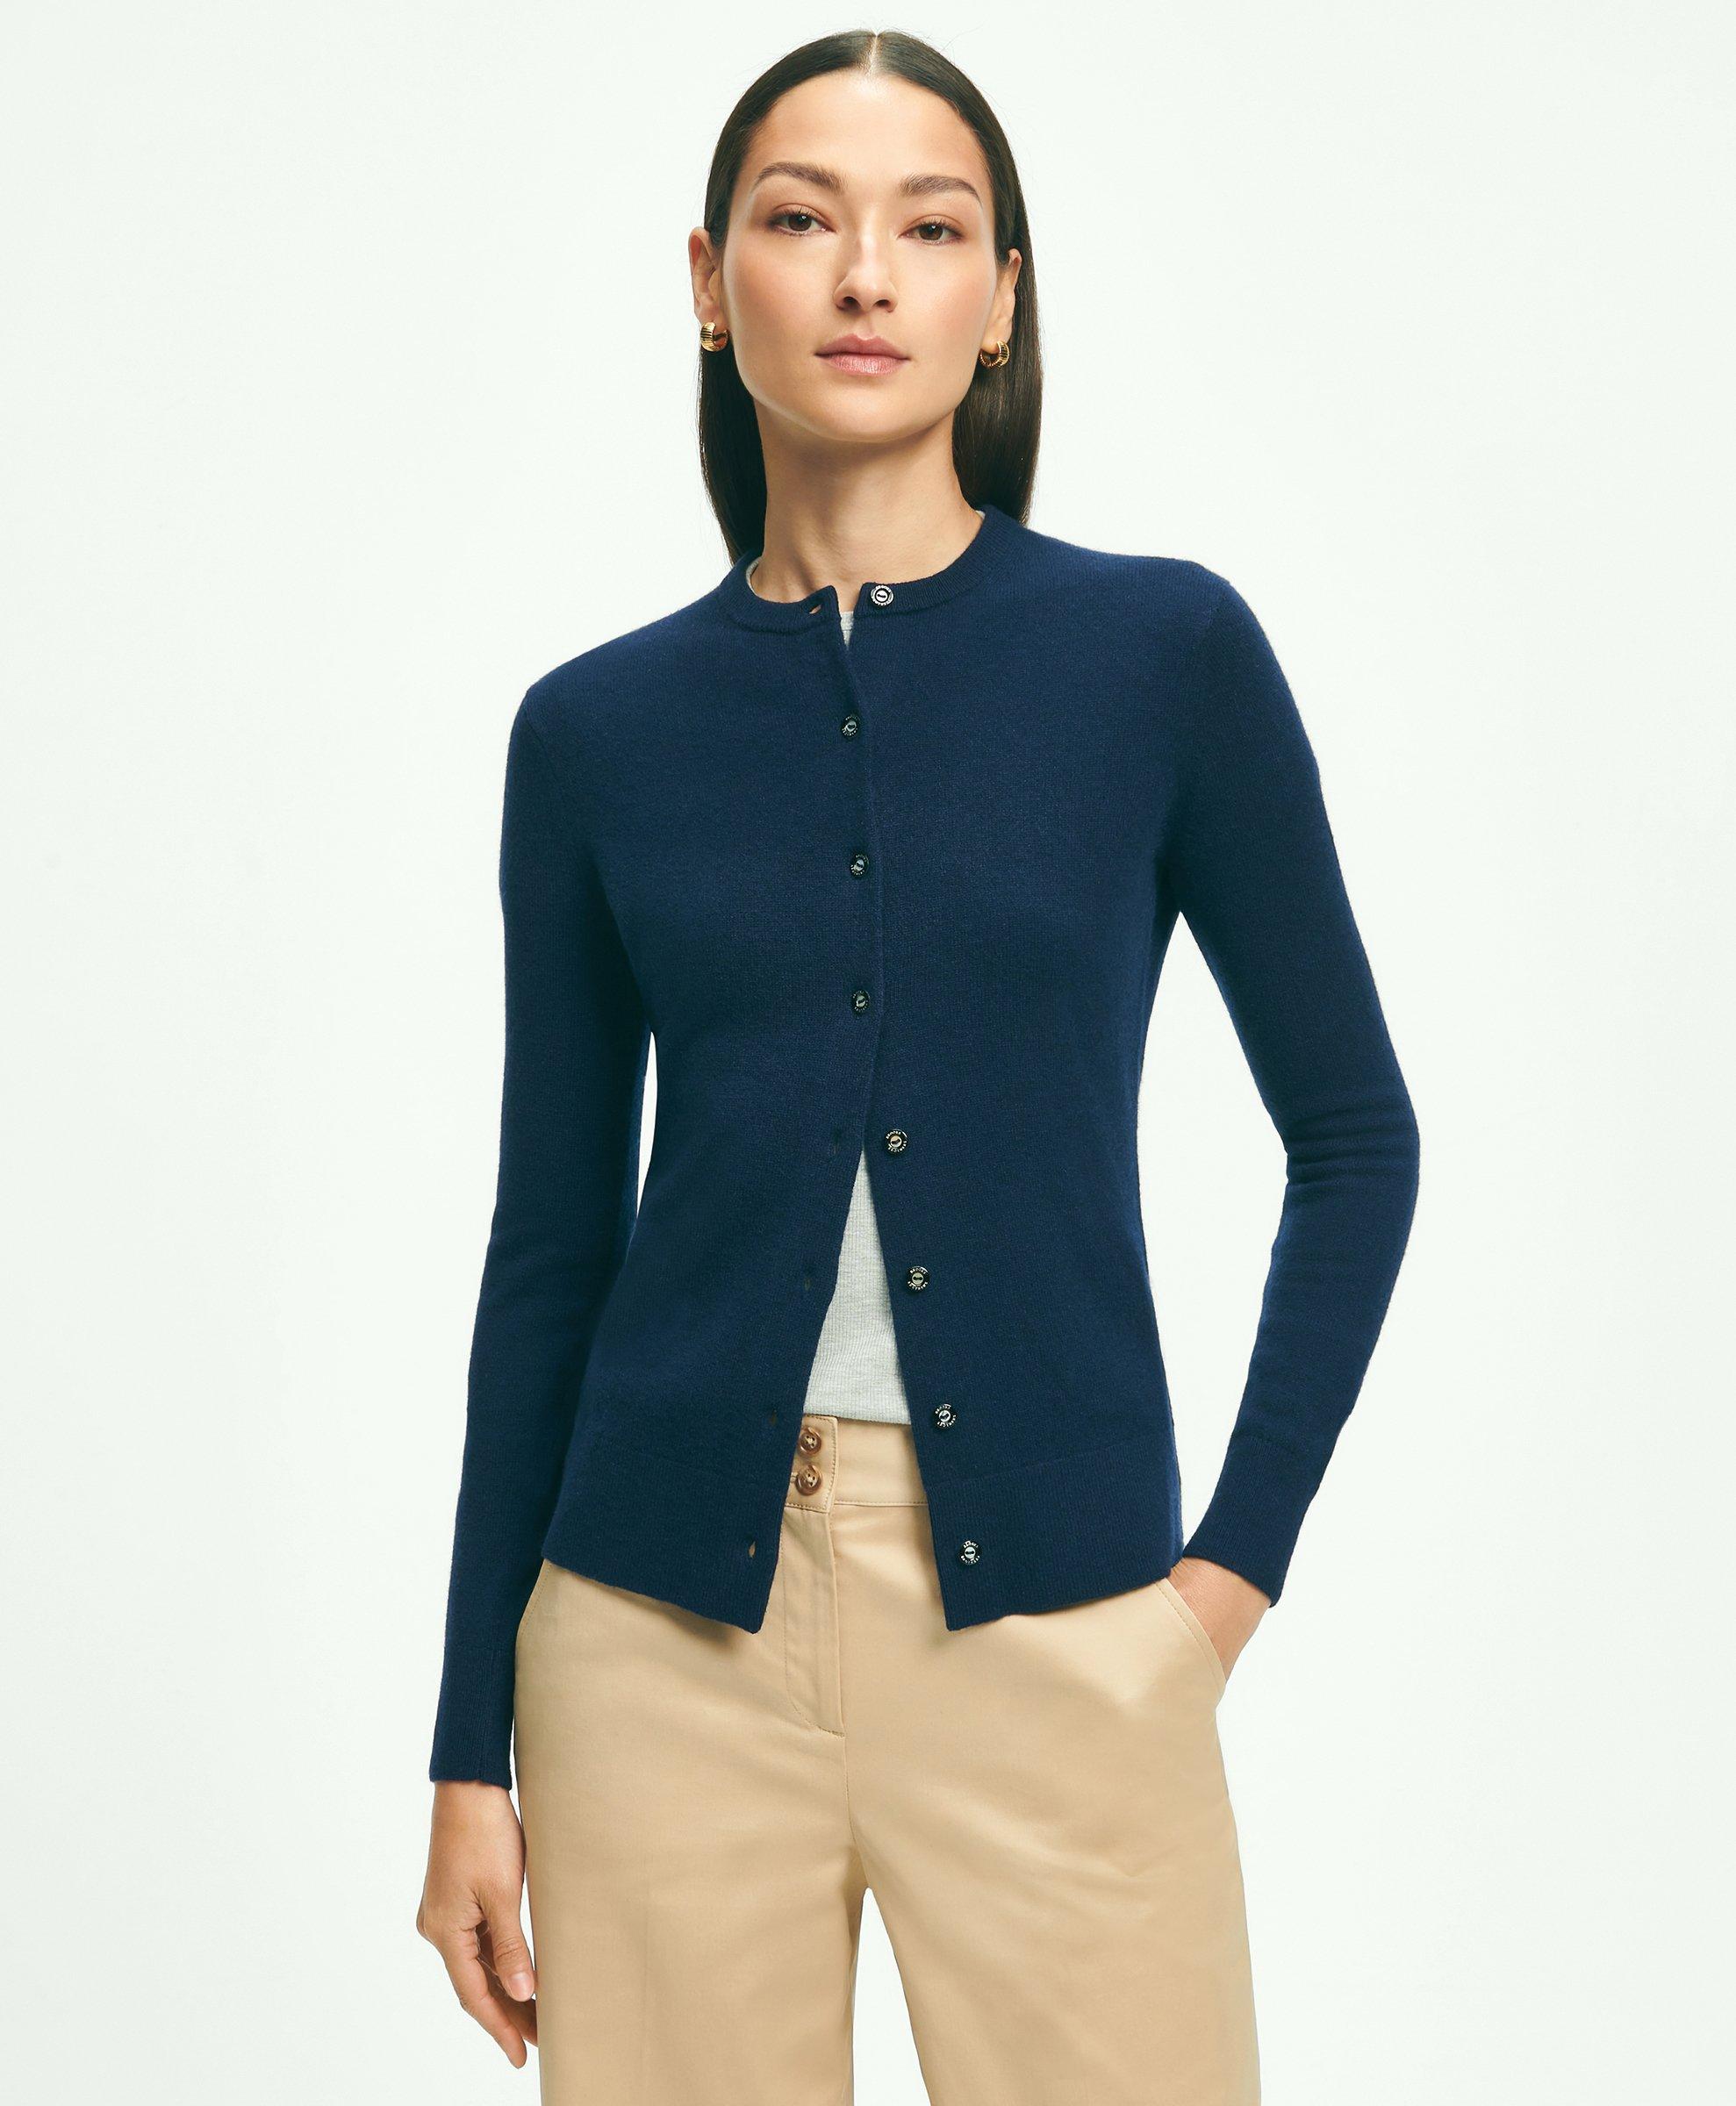 Brothers Womens Brooks with Buttons | Cardigans